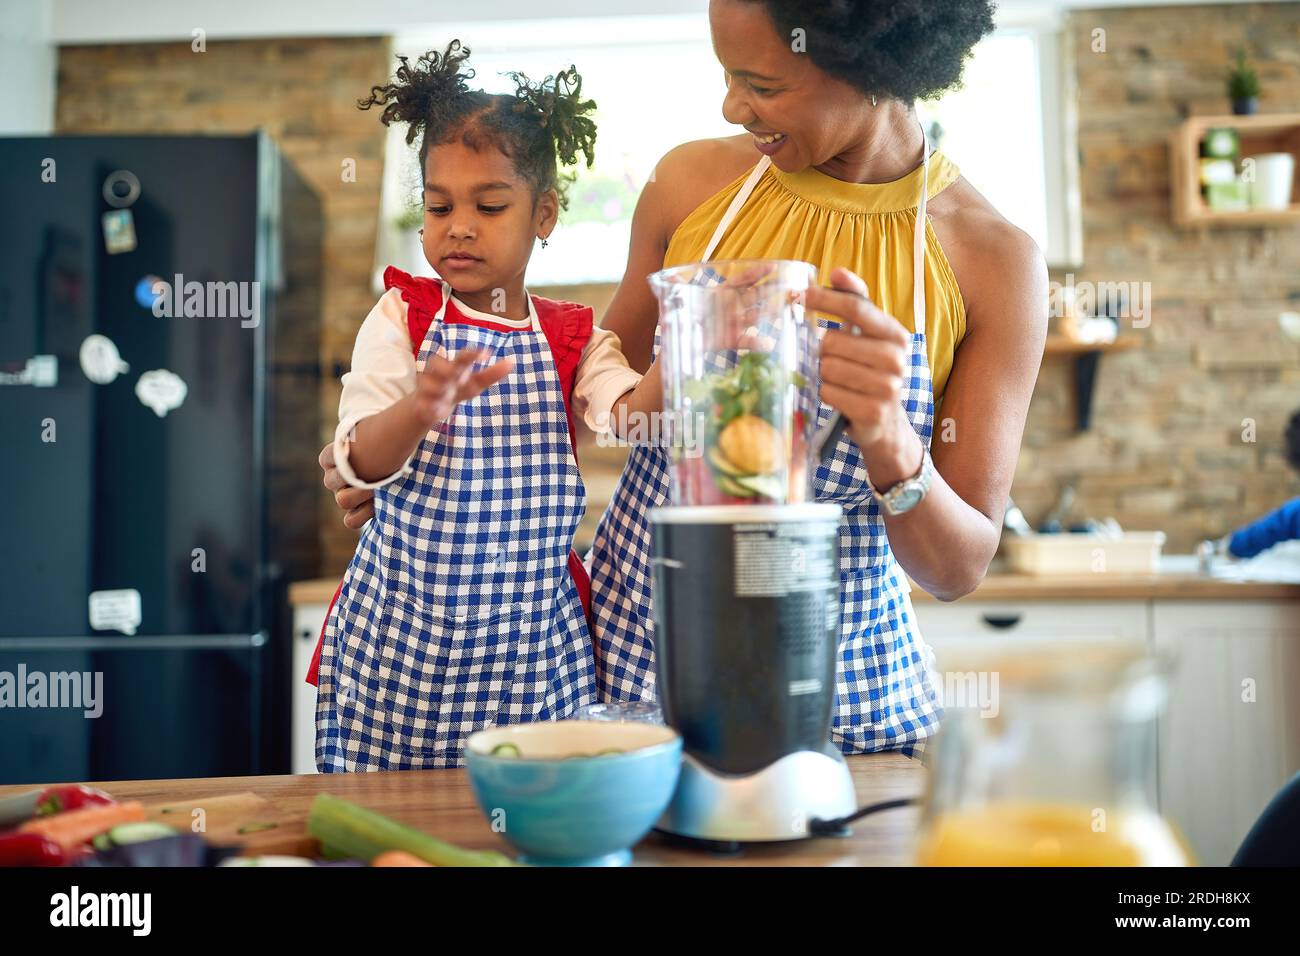 Mother and her young daughter coming together to prepare a healthy meal. Immersed in the process, they are seen adding fresh vegetables to a blender t Stock Photo